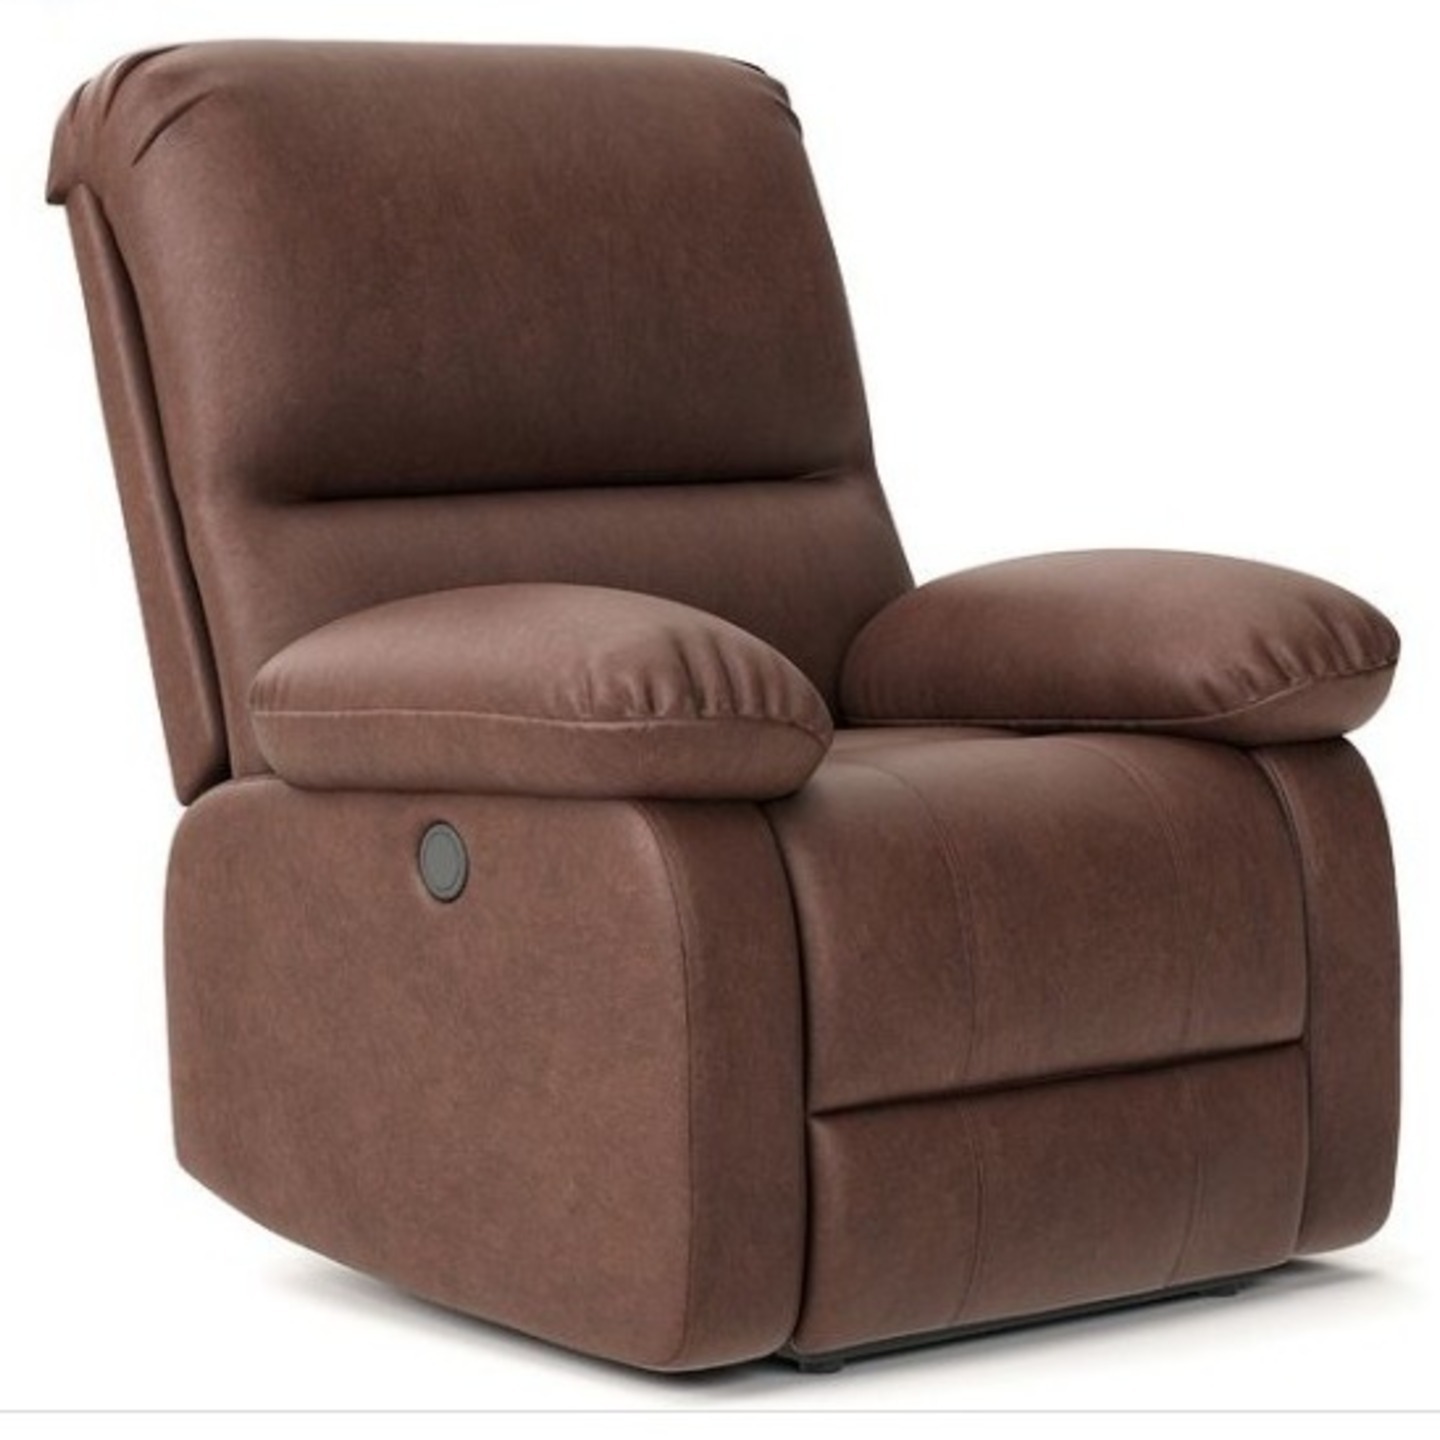 RFL Manual Recliner Chair RC-02 In Brown Colour